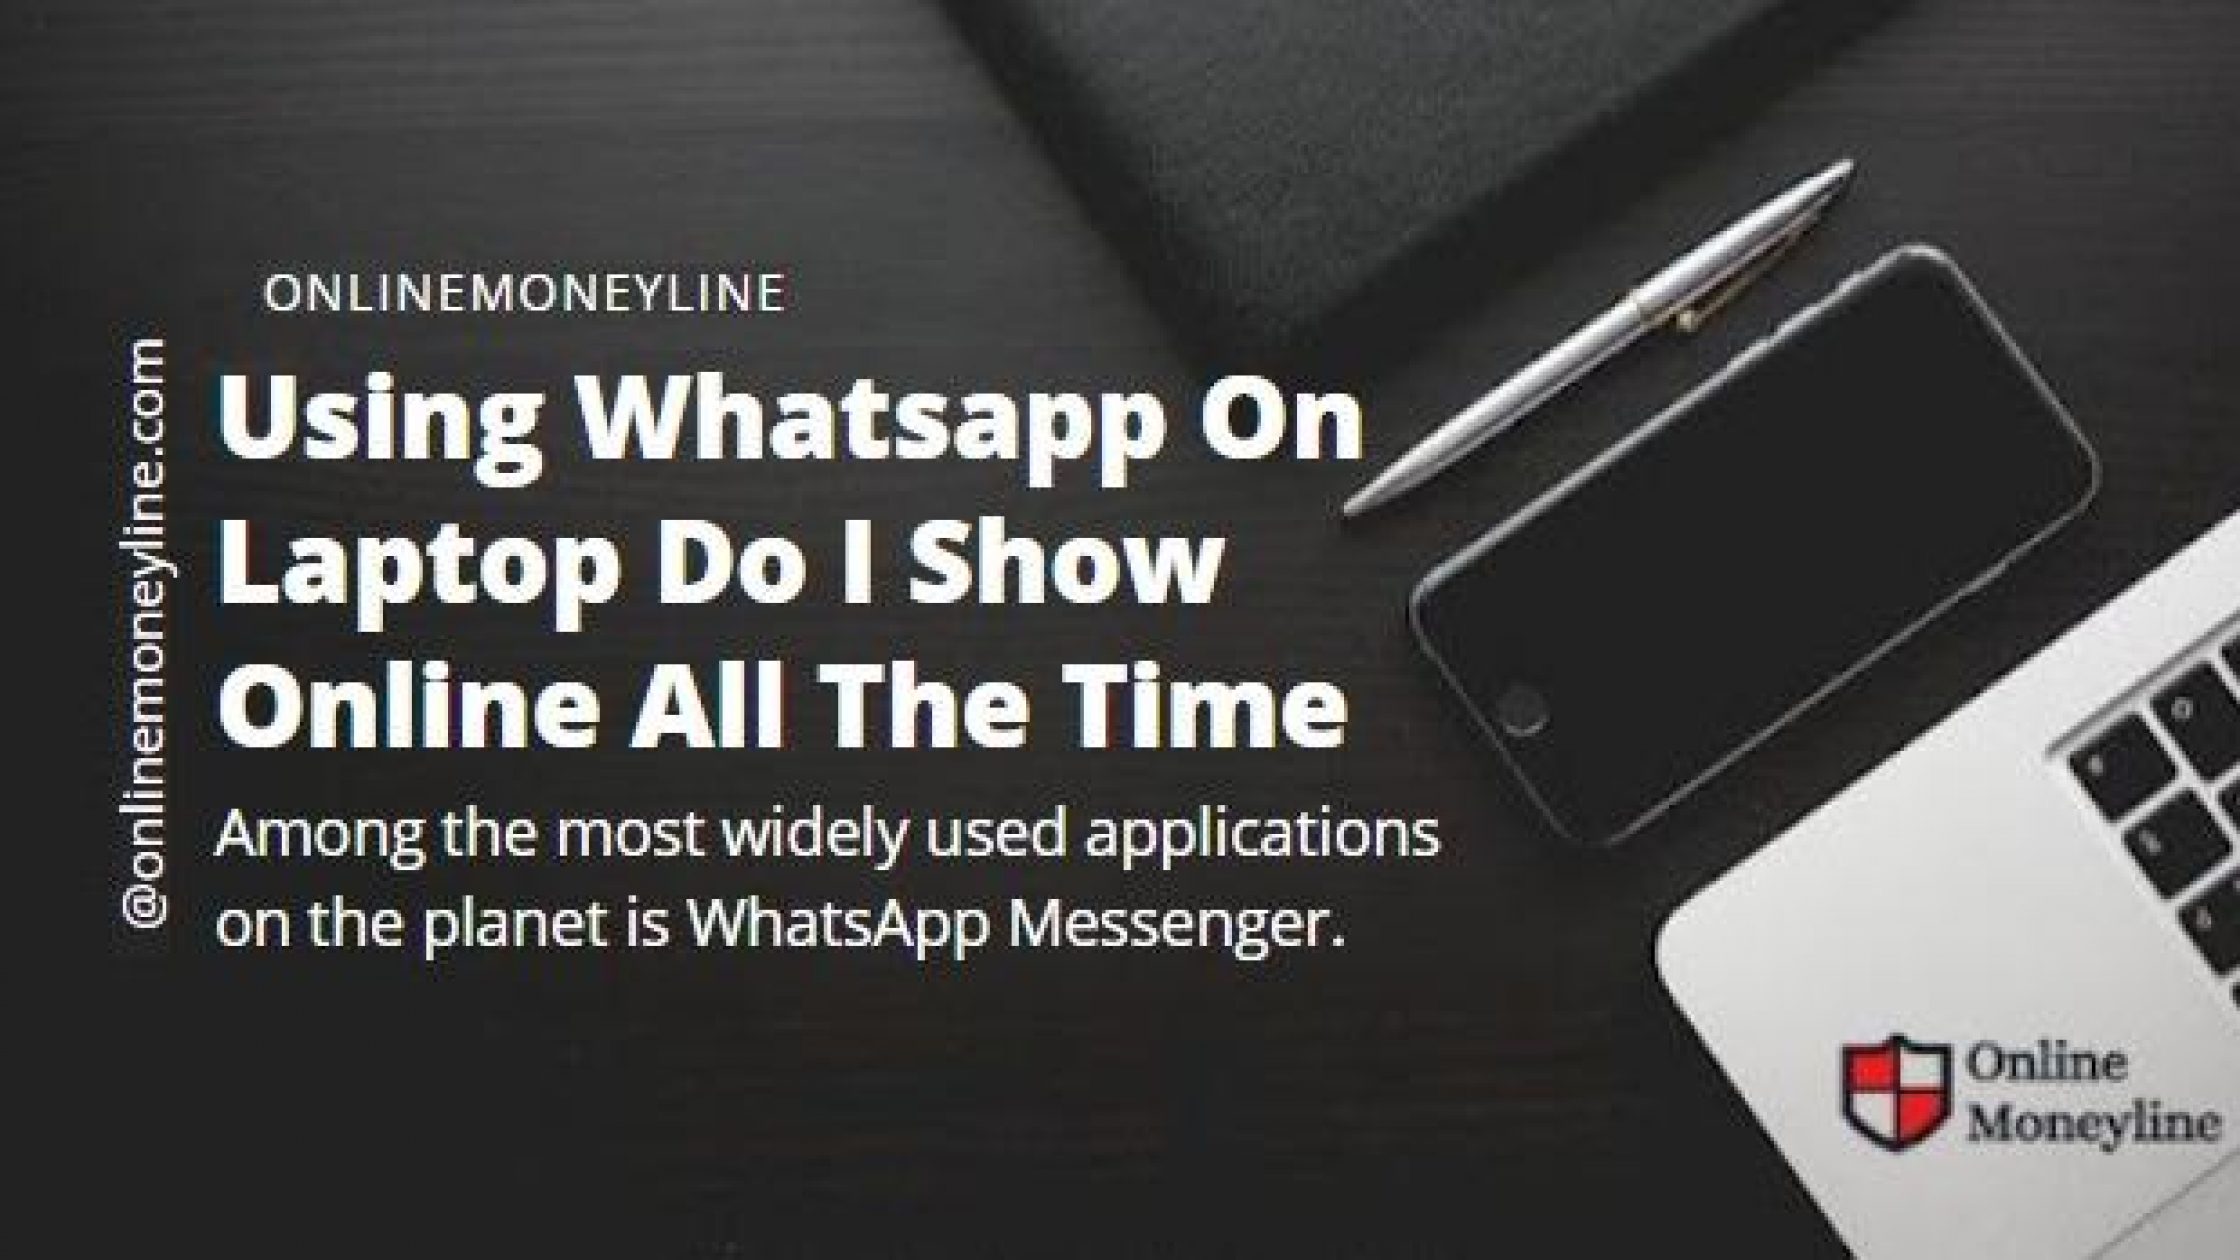 Using Whatsapp On Laptop Do I Show Online All The Time